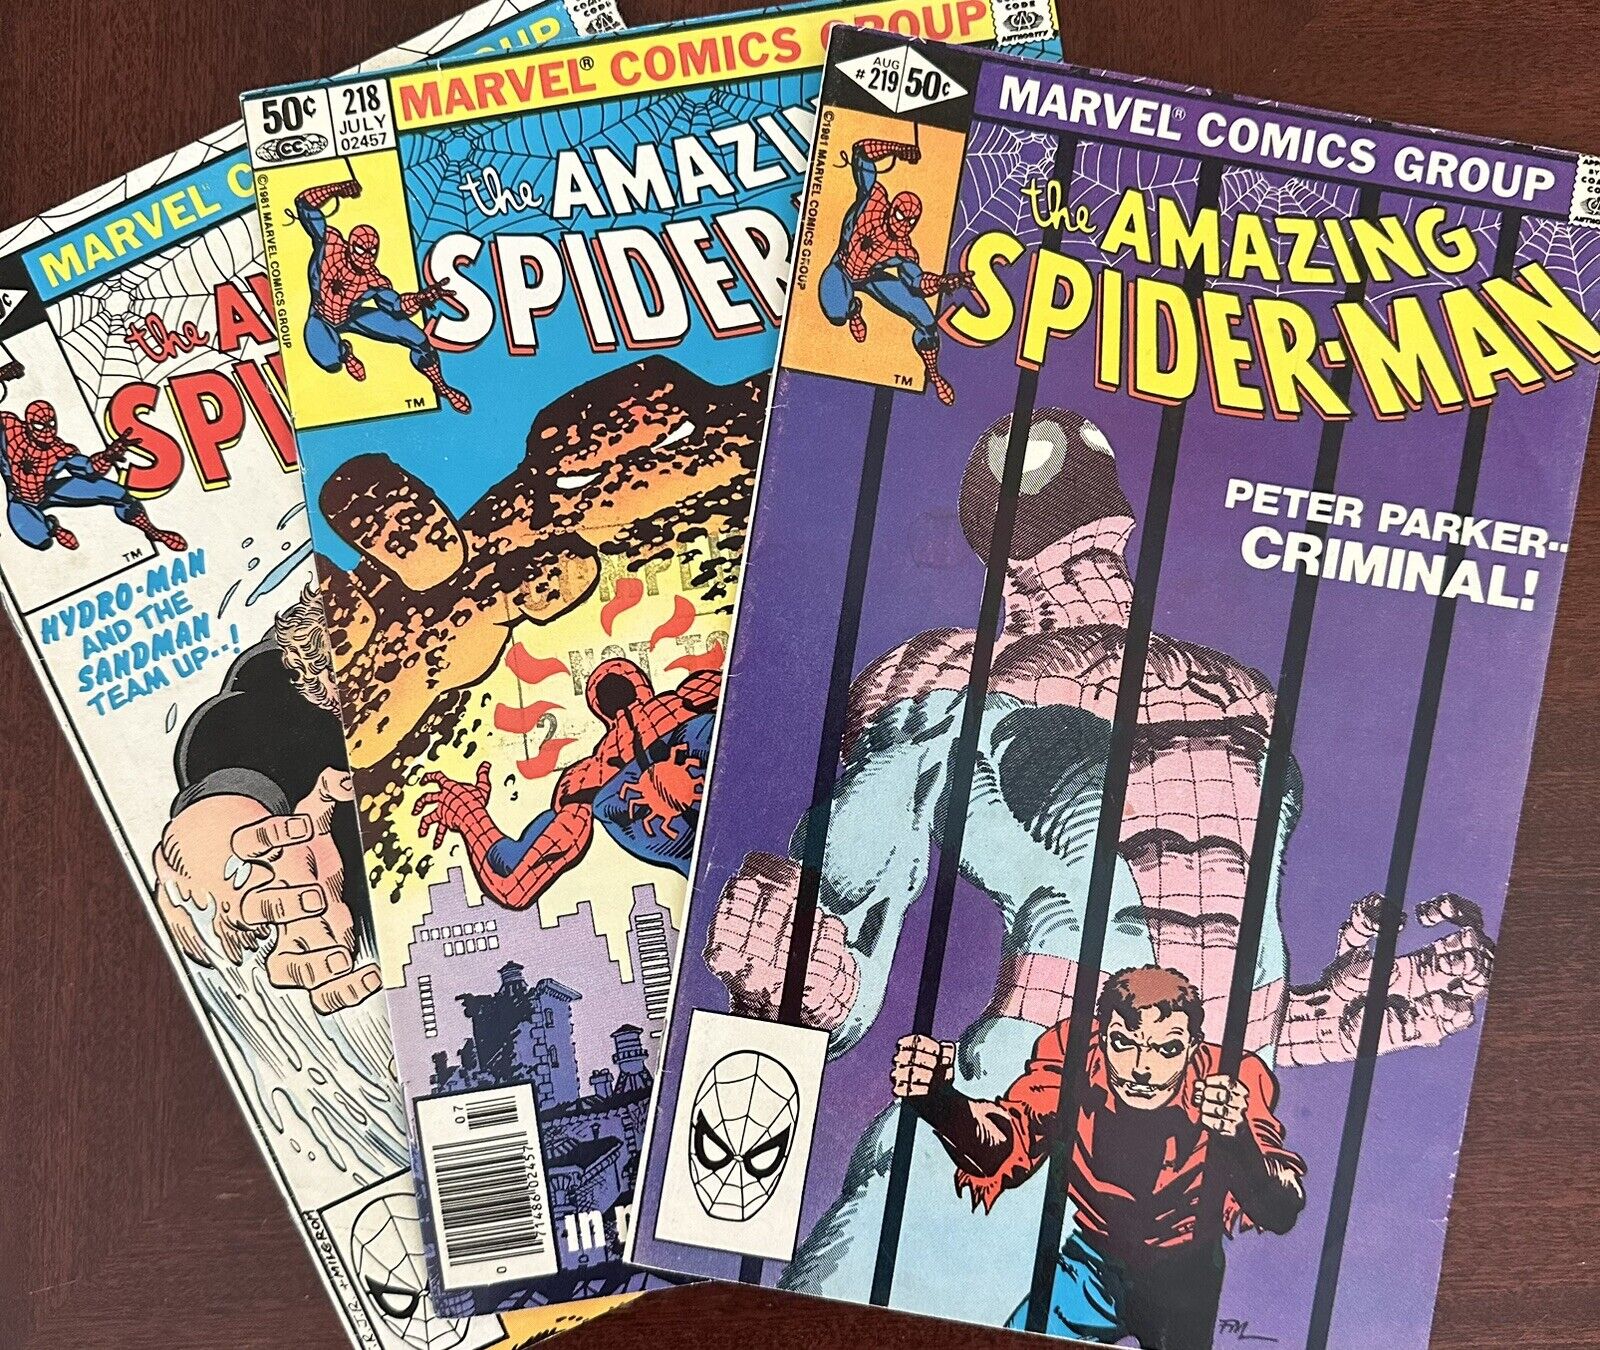 LOT - 3 issues Amazing Spider-Man #217 + 218 + 219 (1981)